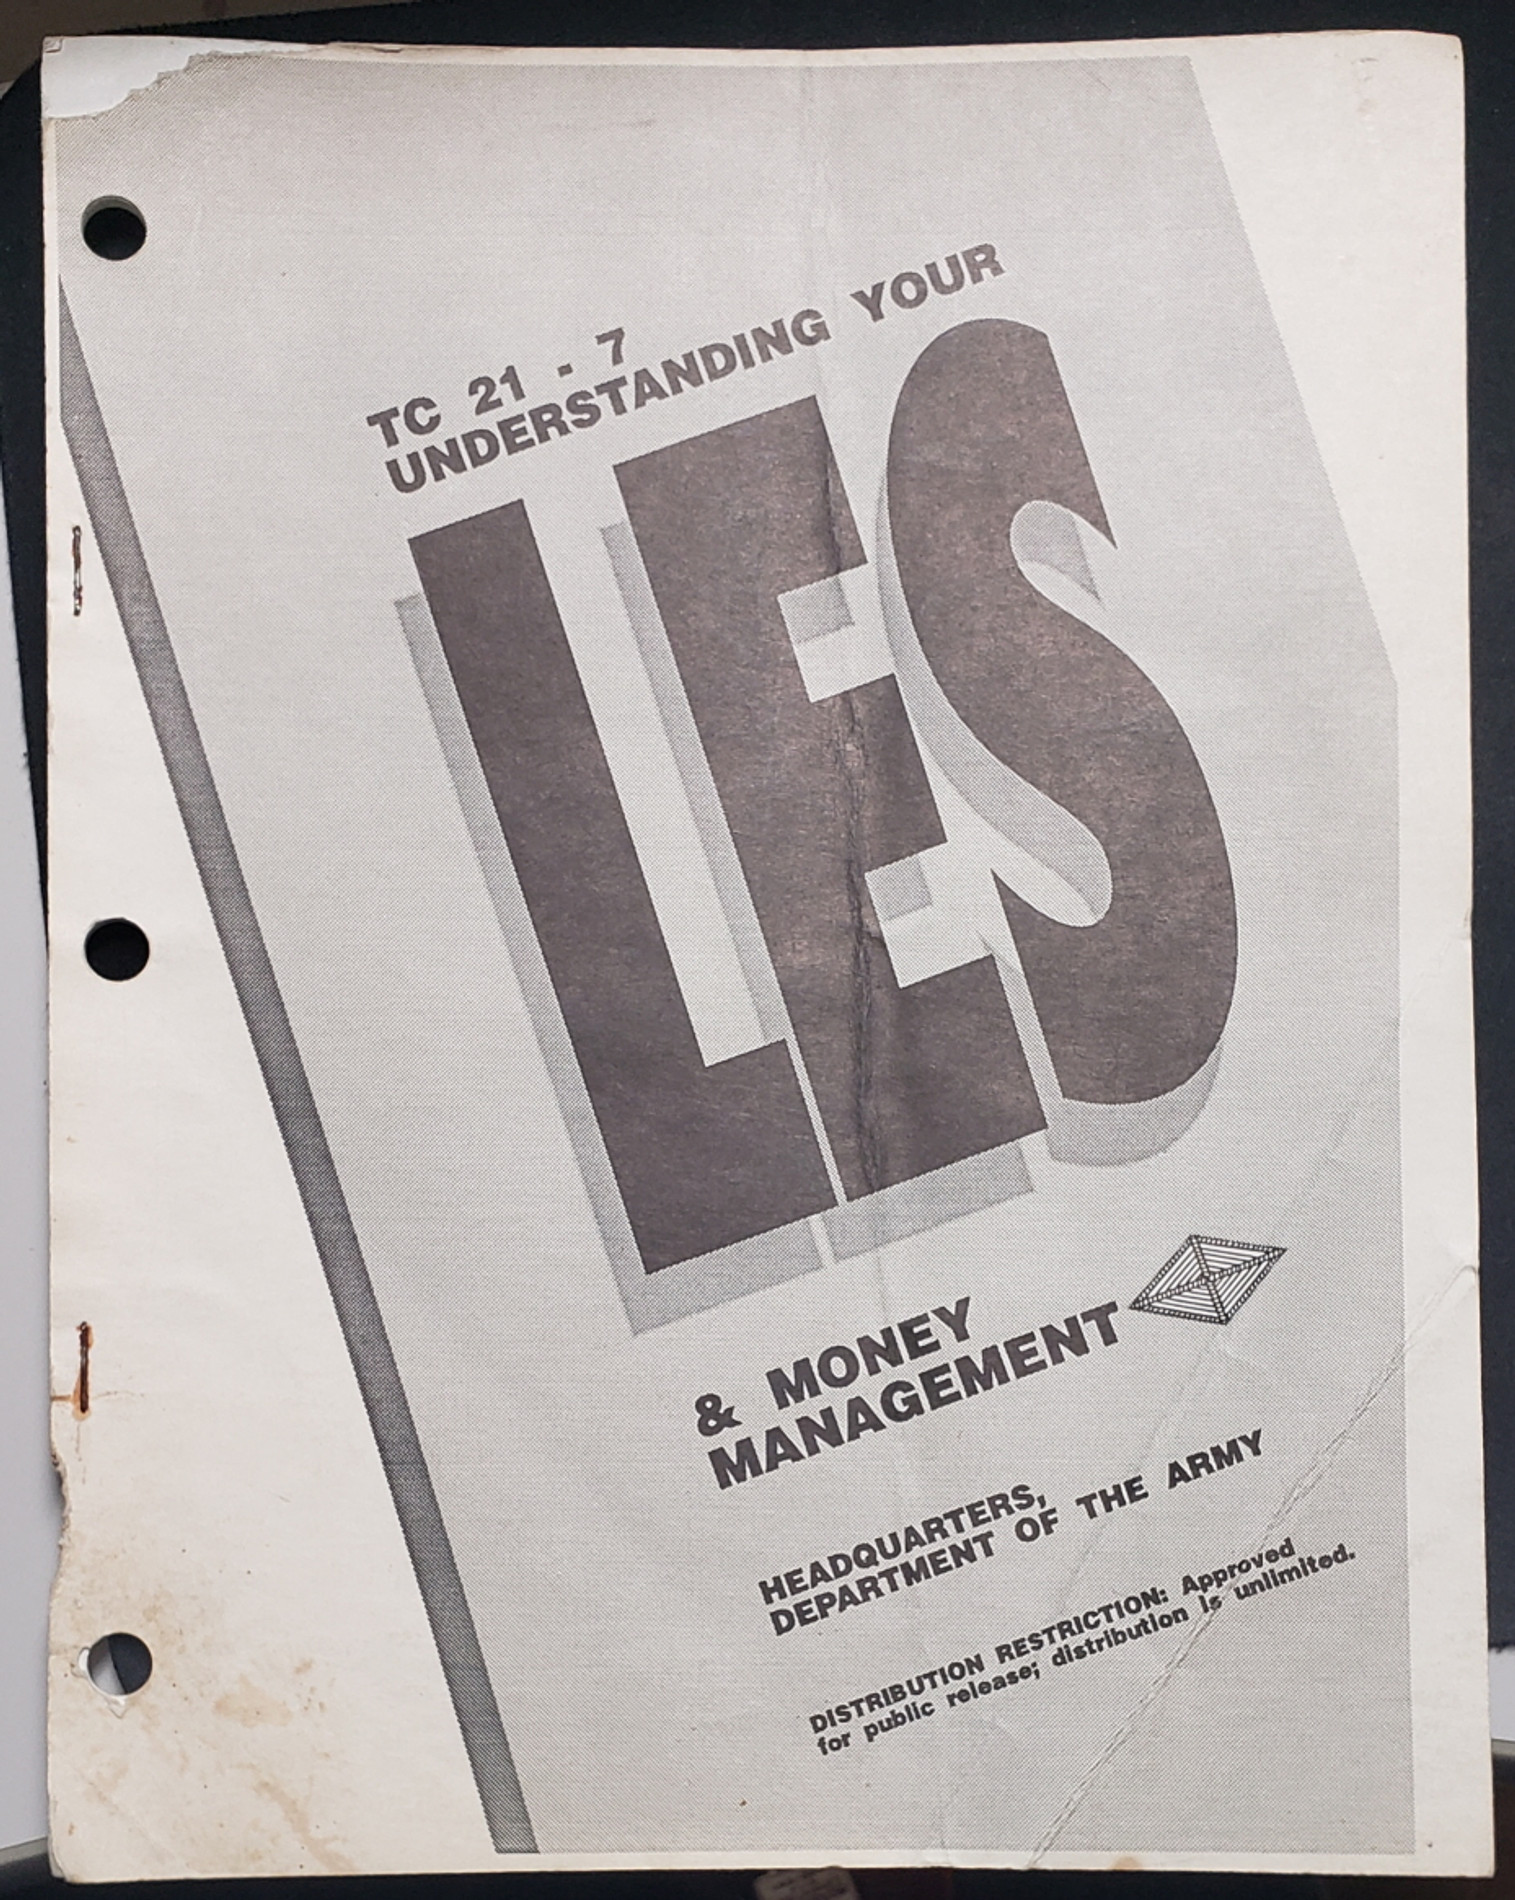 US Armed Forces Field Manual - Understanding Your LES & Money Management (1992)